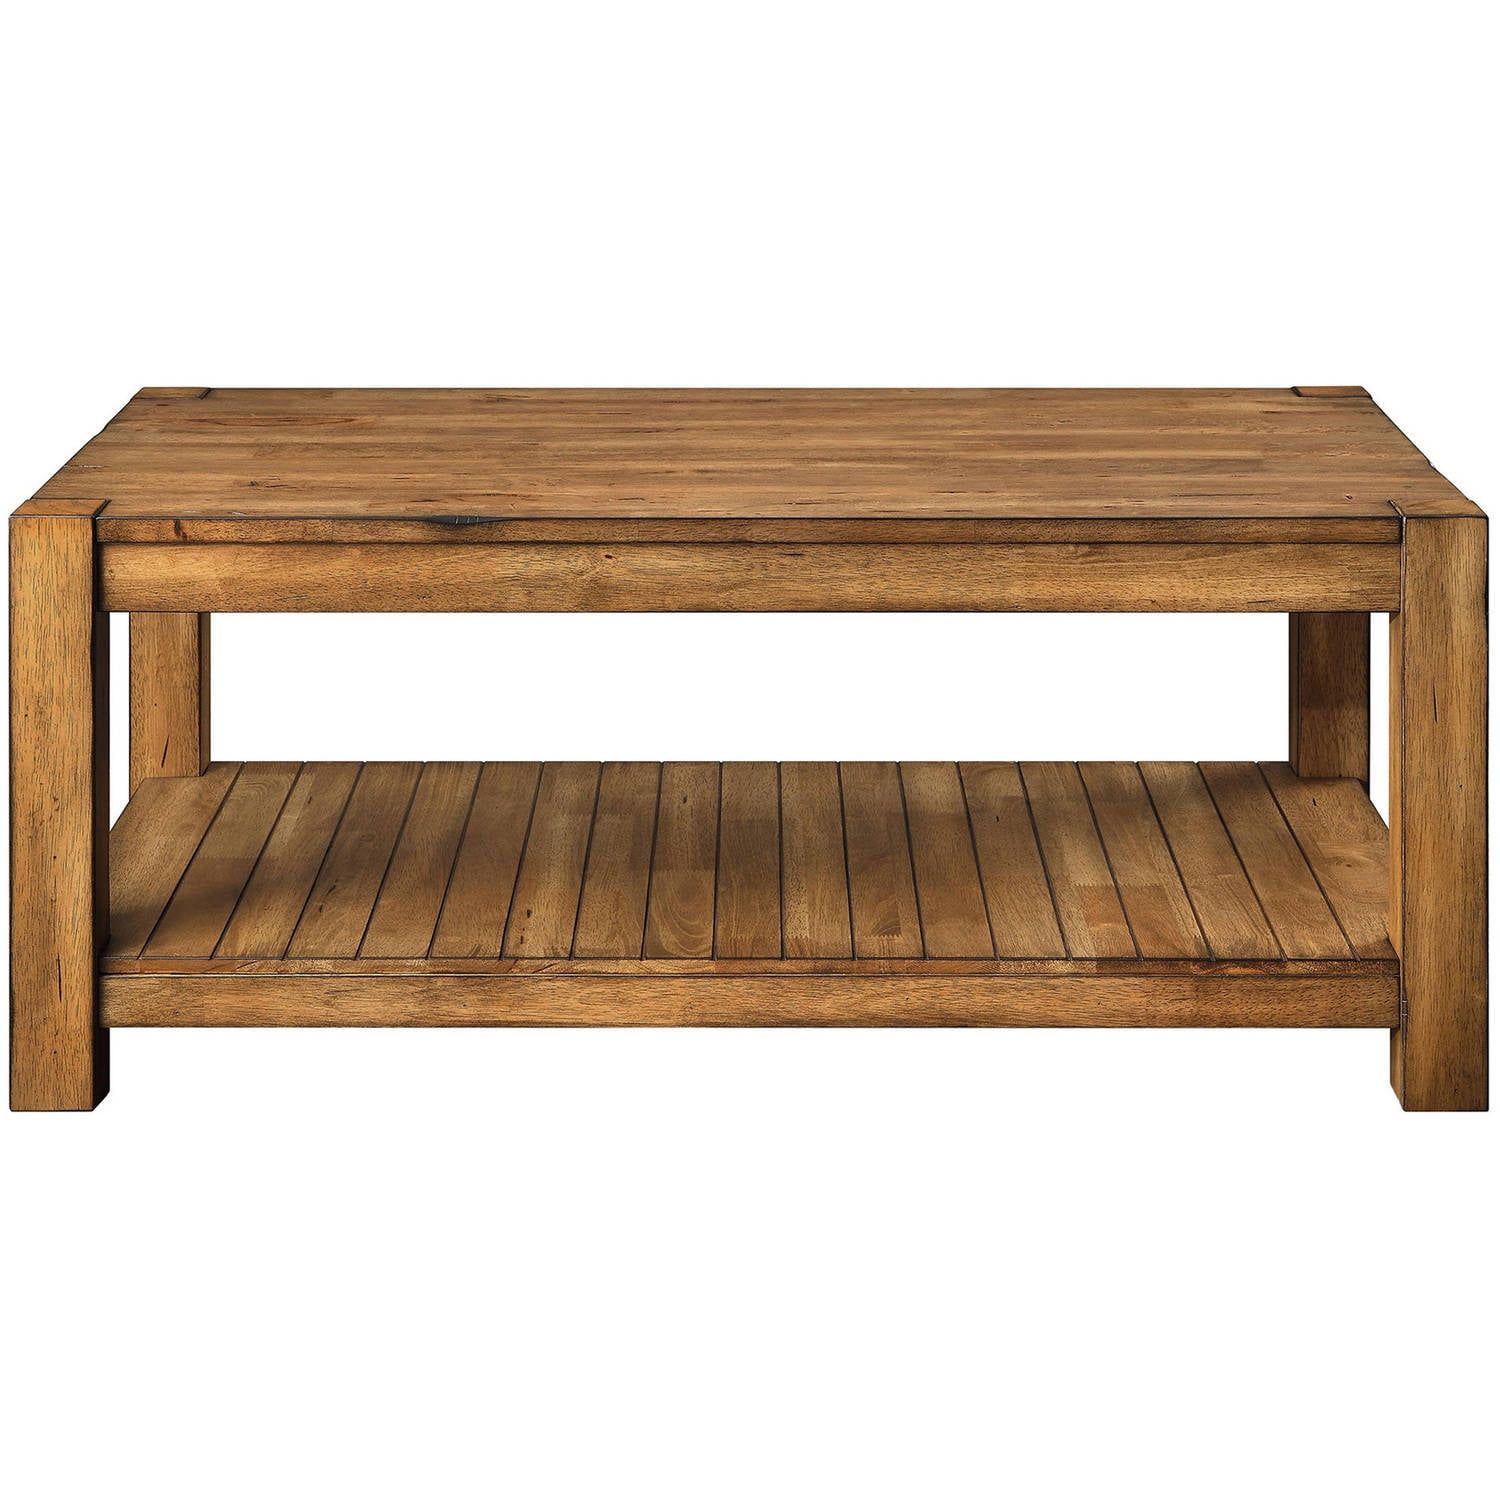 Buy Better Homes & Gardens Bryant Solid Wood Coffee Table, Rustic Maple Within Brown Rustic Coffee Tables (Gallery 10 of 20)